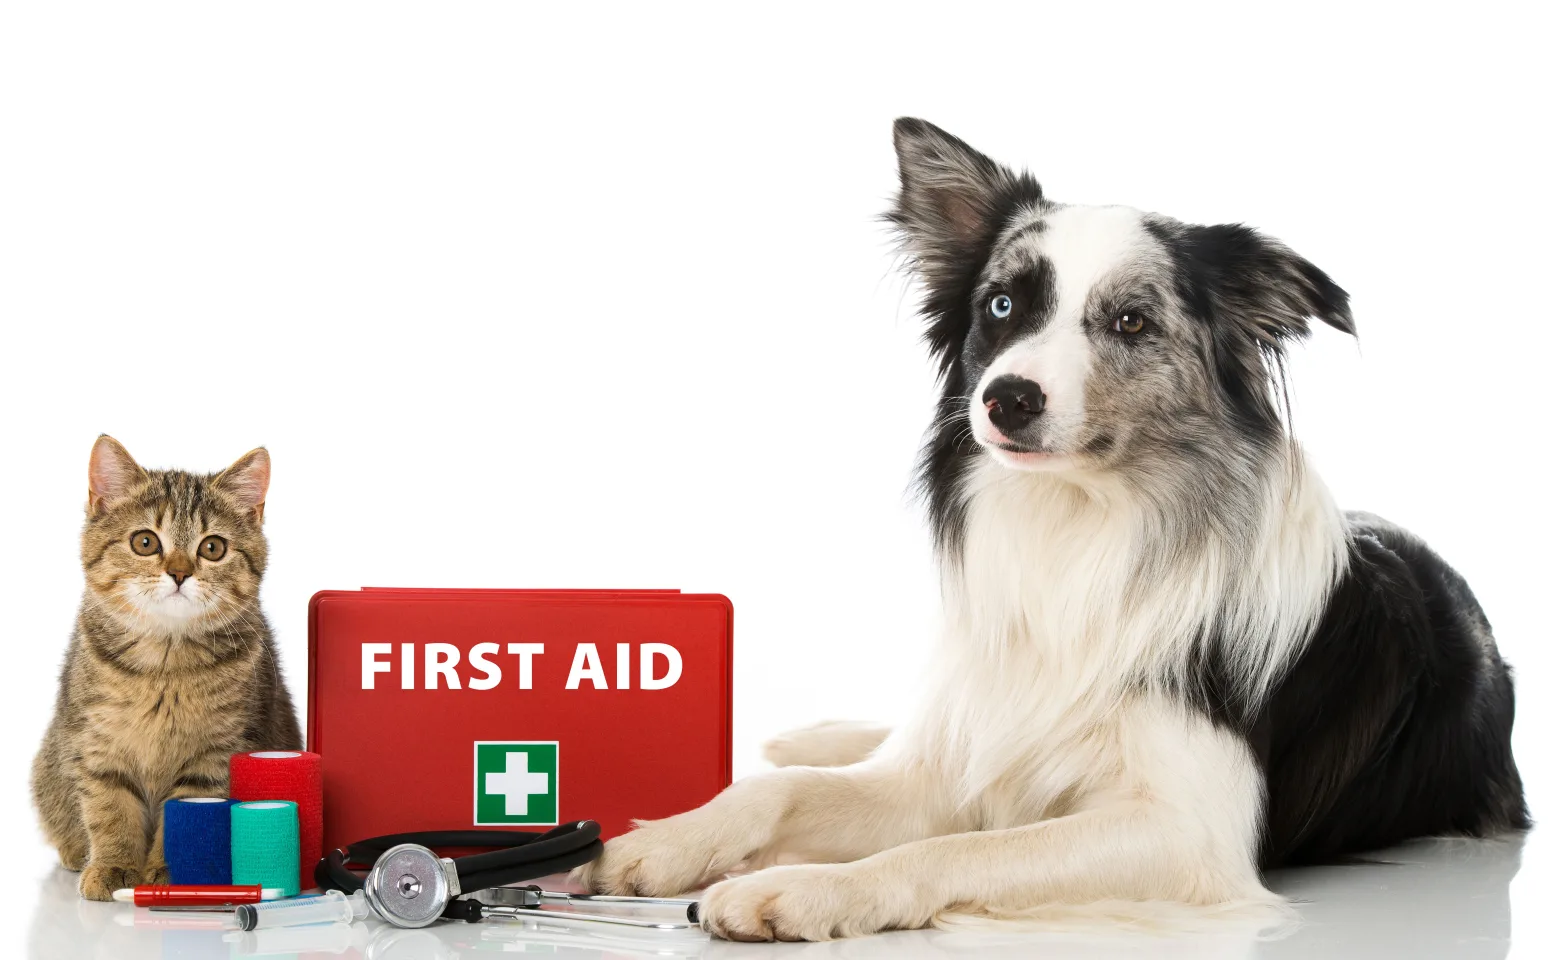 cat and dog sitting next to first aid kit